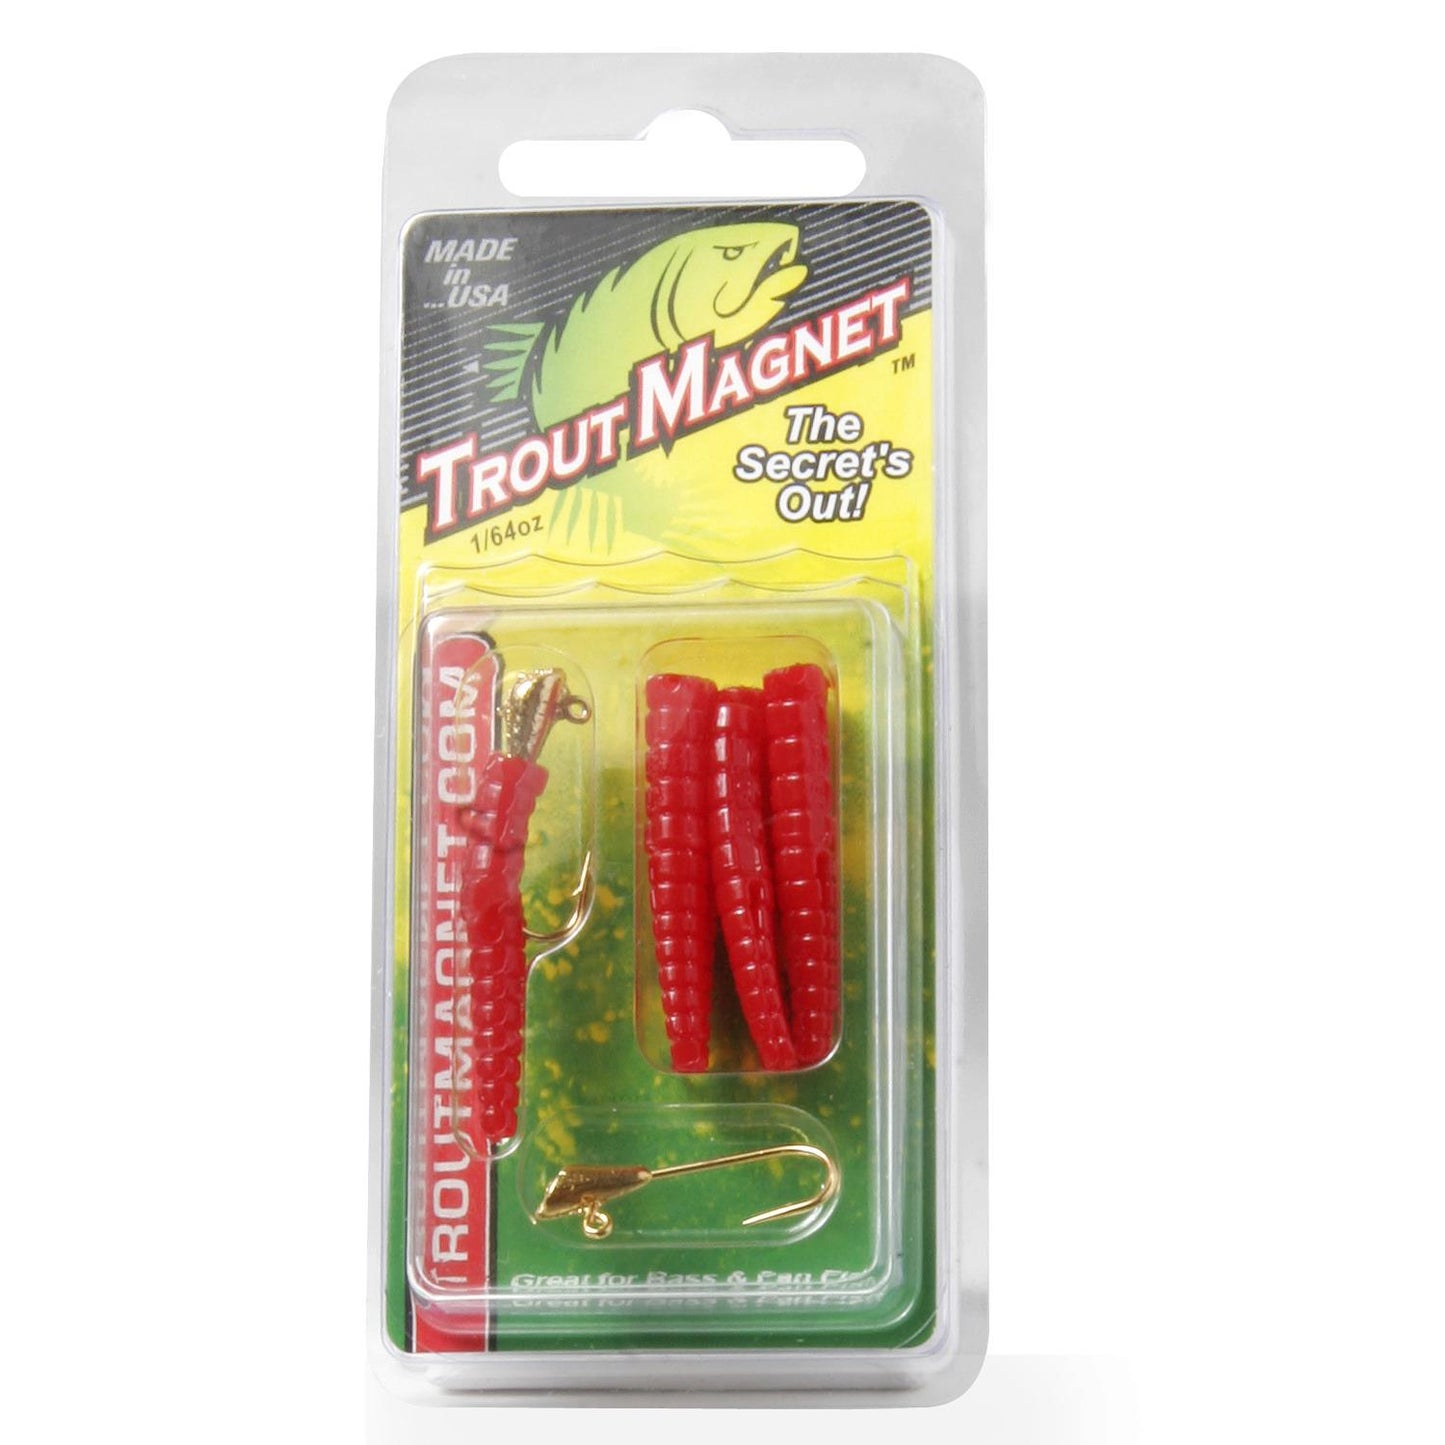 Leland 87683 Trout Magnet 9pc. Pack Red 7 Bodies and 2-1/64 oz Size 8